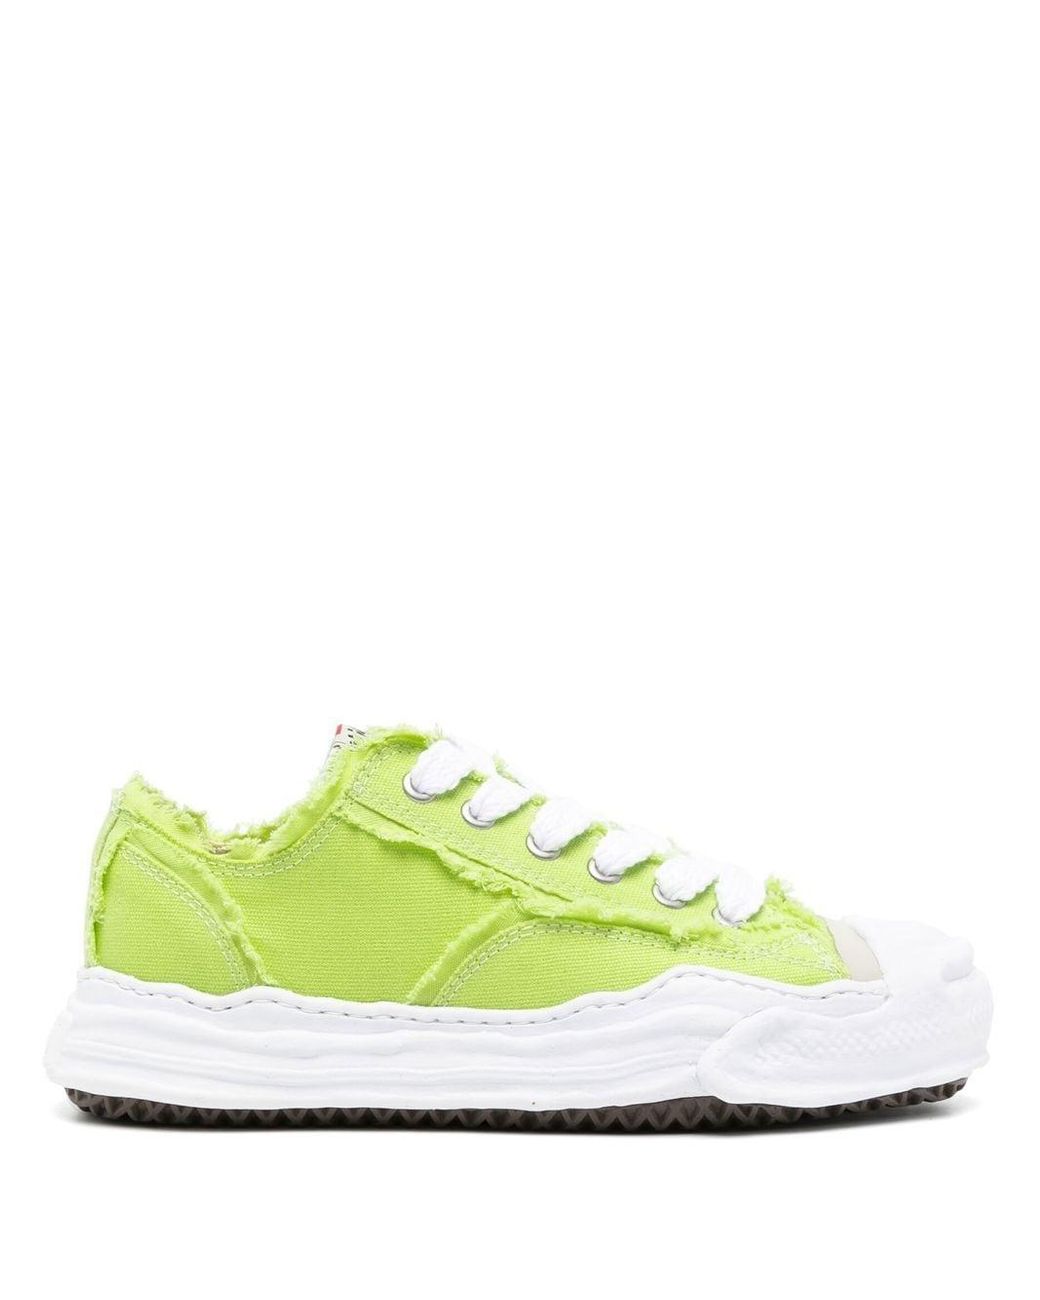 Maison Mihara Yasuhiro Hank Og Frayed Low-top Sneakers in Yellow for ...